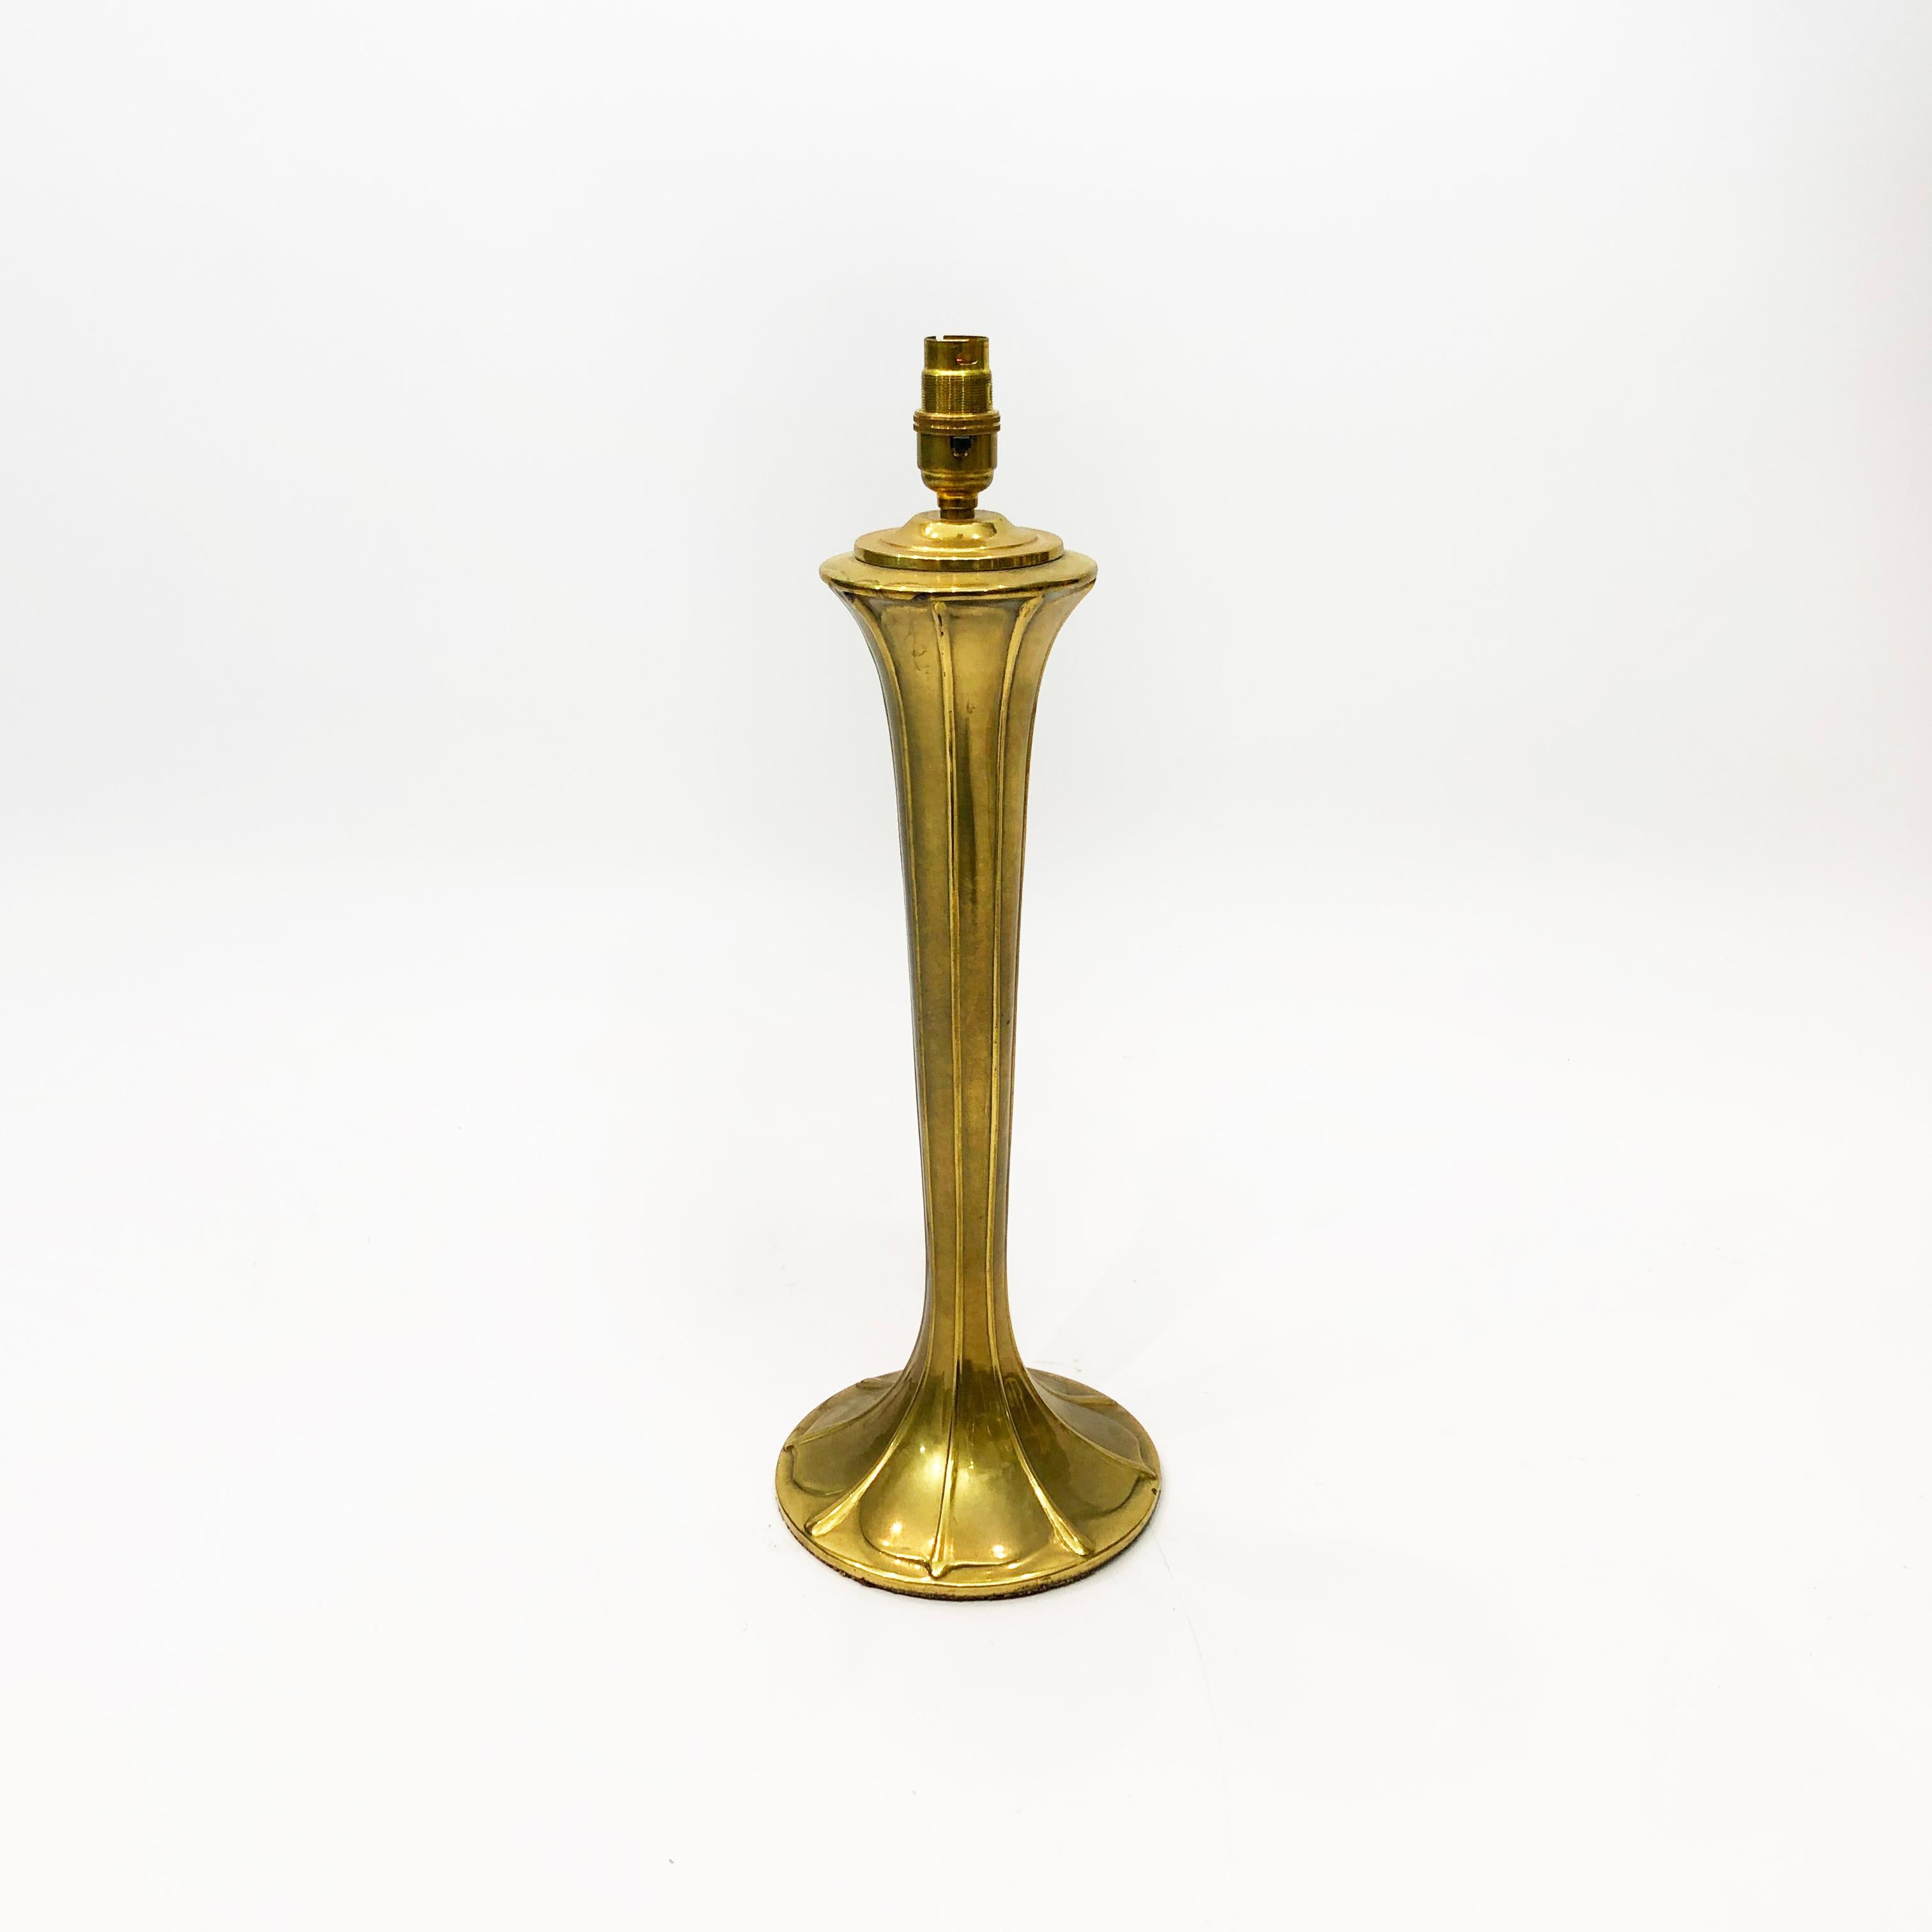 Brass Art Nouveau Style Table Lamp 1970s Vintage art deco Hollywood Regency In Good Condition For Sale In London, GB